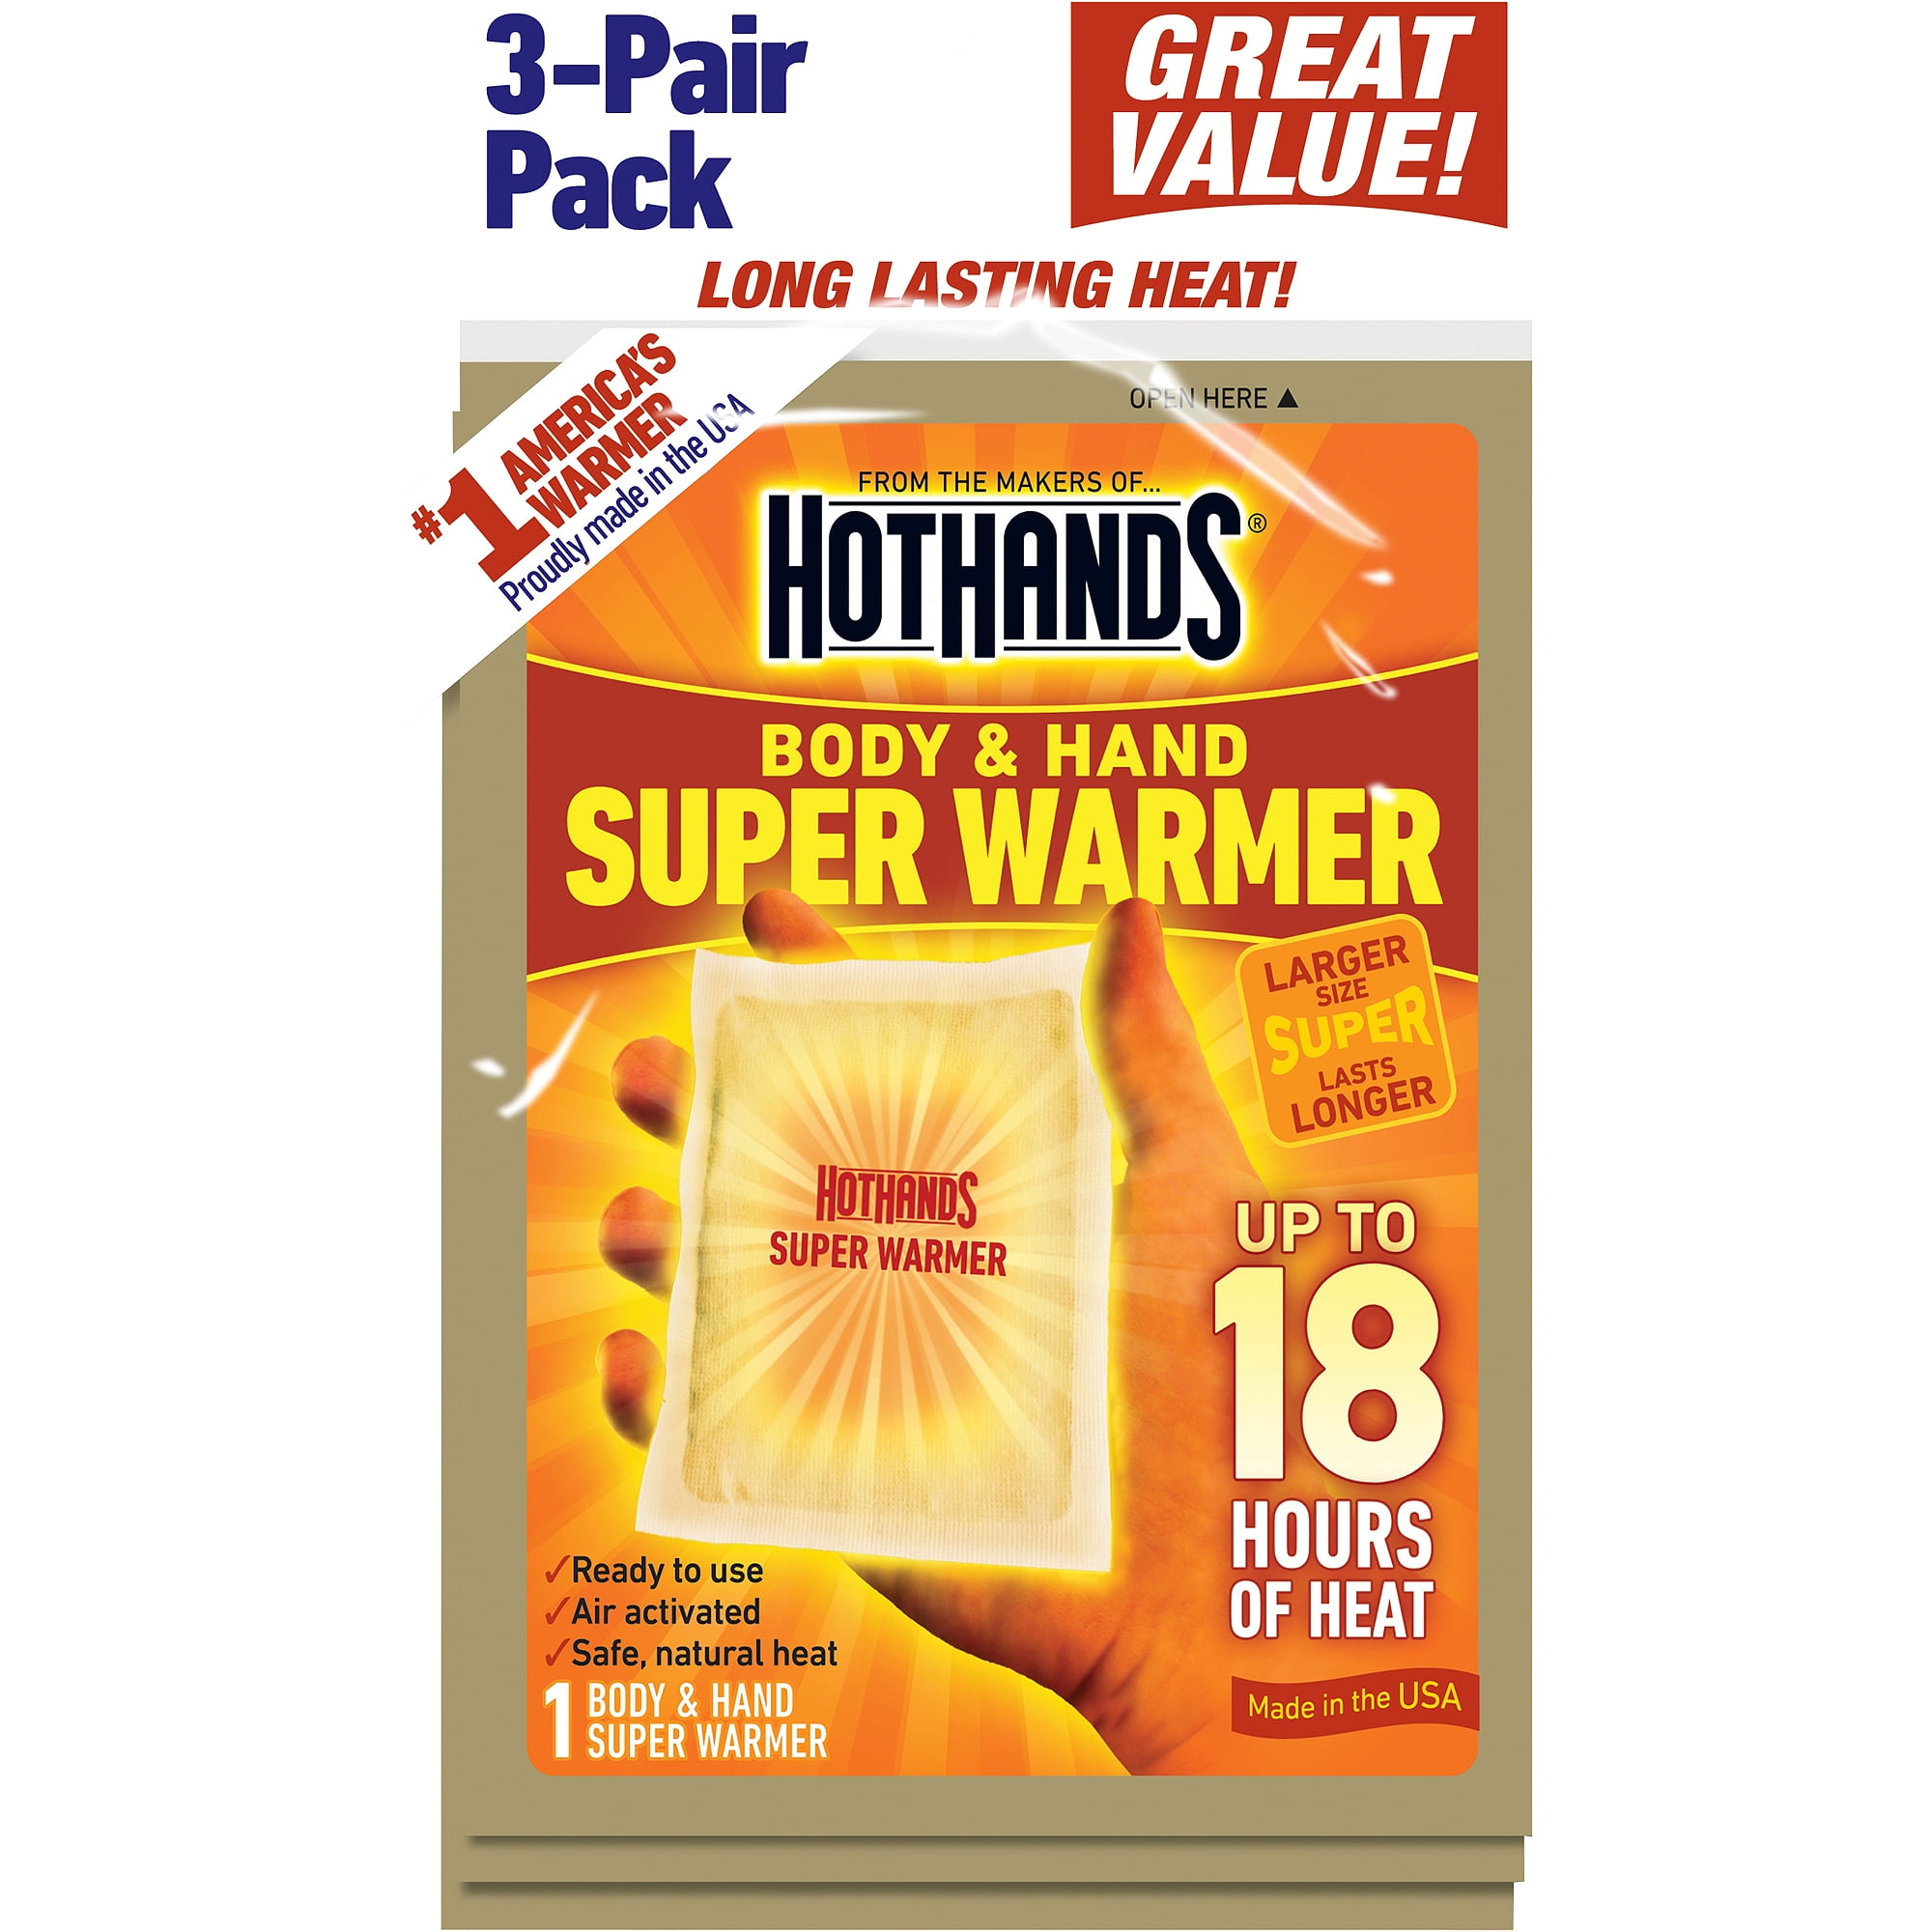 3 HotHands Body & Hand Large Super Warmer 18 Hours Natural Heat Ready Warmers for sale online 